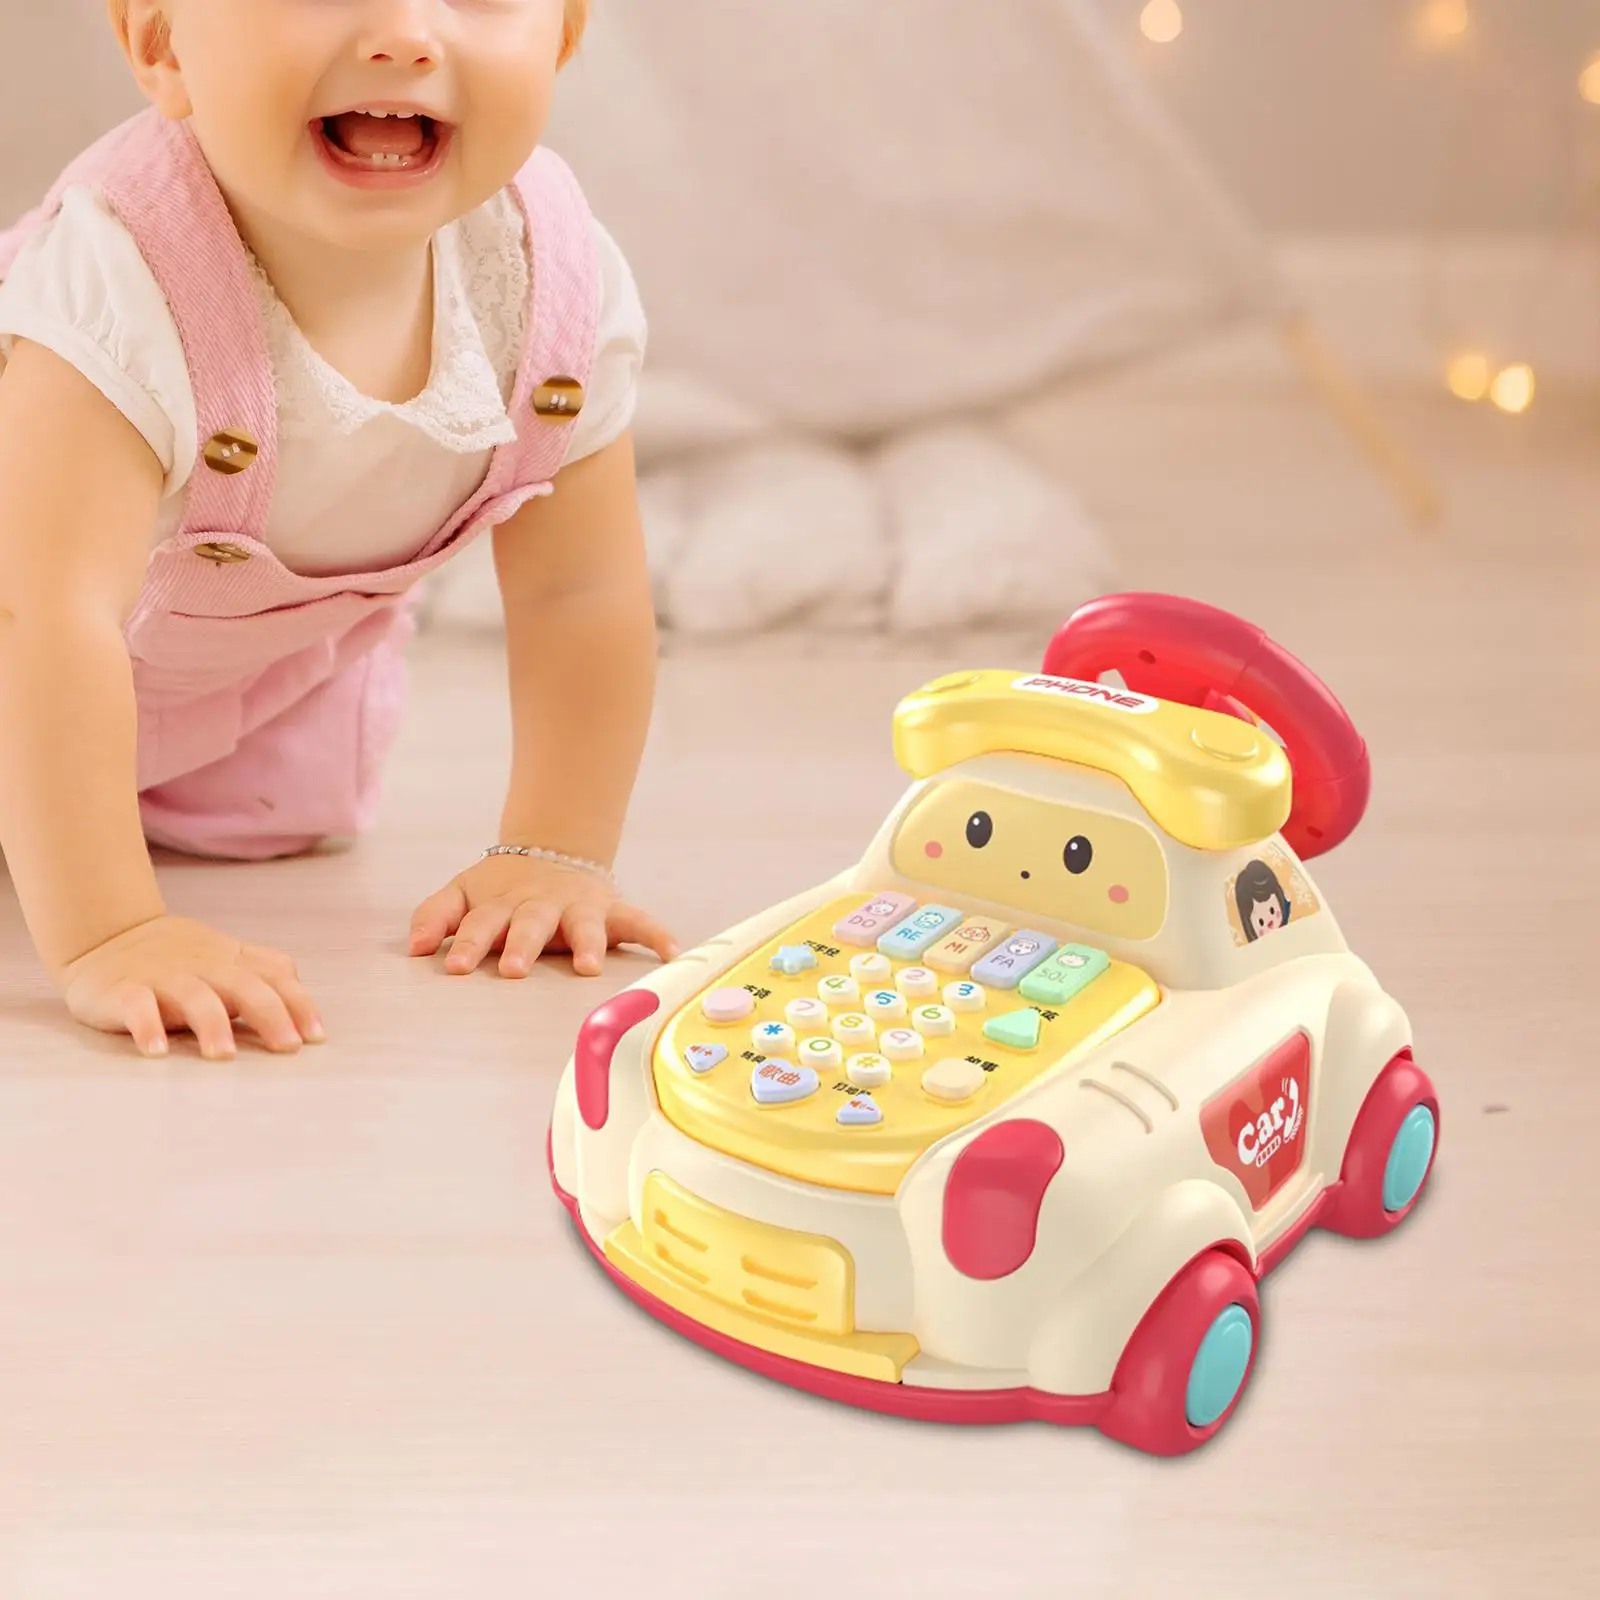 toddlers Steering Wheel Car Multifunctional Movable Fine Motor Skills Baby Telephone Toy for Game Development Activity Preschool